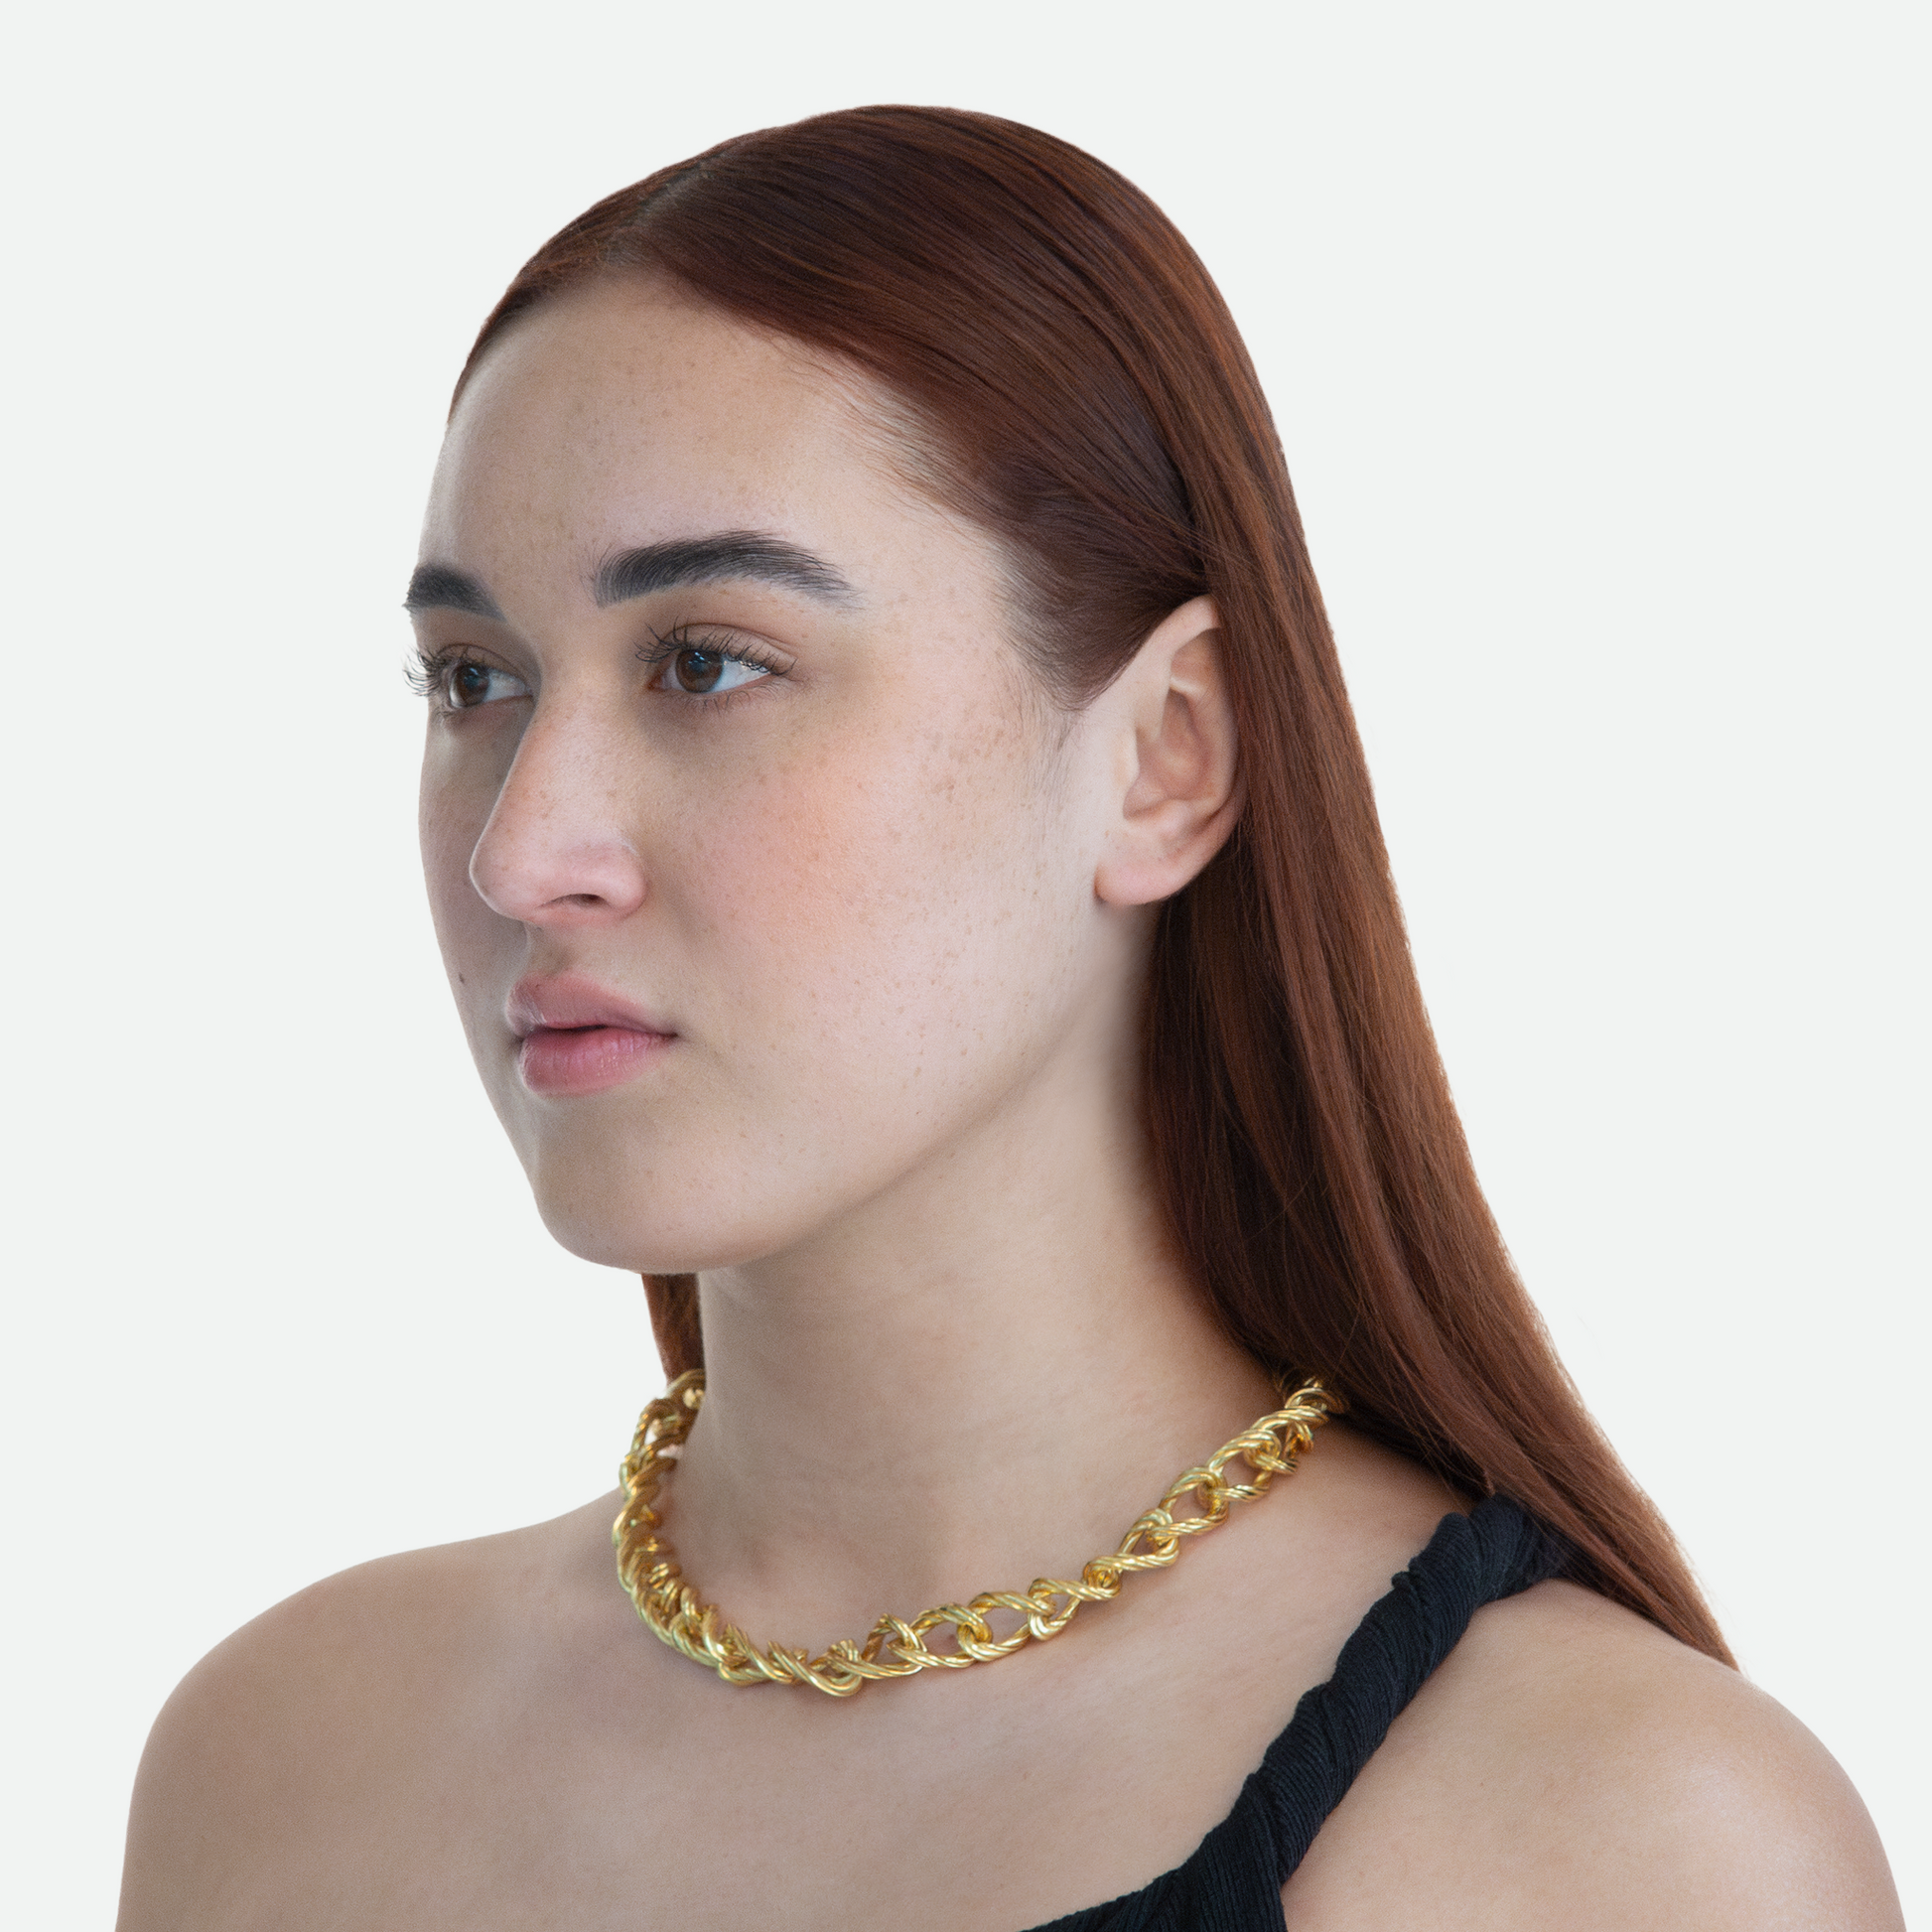 Model at a 45-degree angle view wearing the Helix necklace, highlighting the signature twisting design and seamless flow of gold links, on a white background.